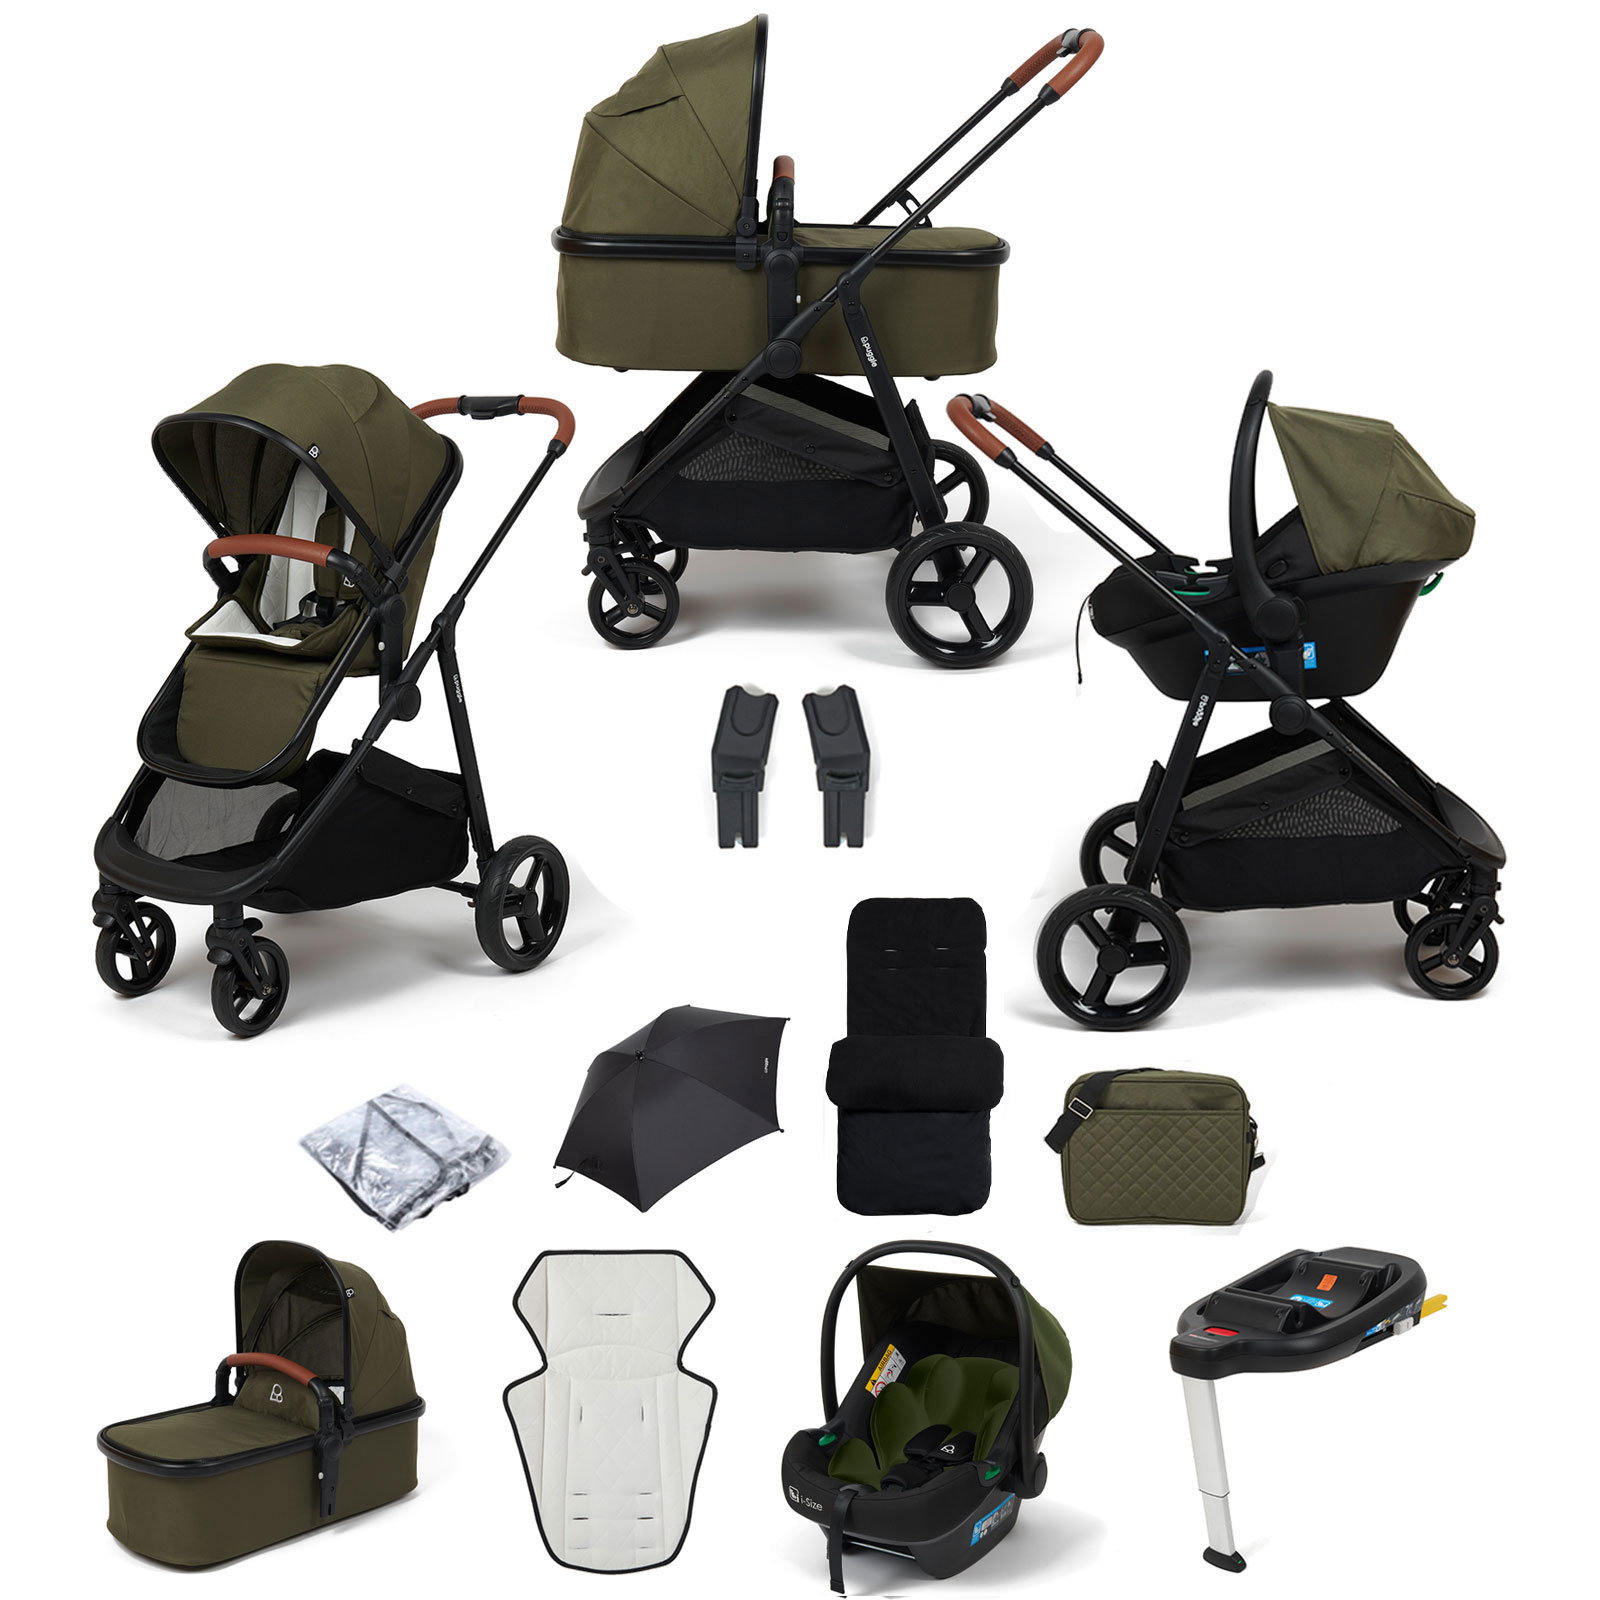 Puggle Monaco XT 3in1 i-Size Travel System with Changing Bag, Deluxe Footmuff, Parasol & ISOFIX Base - Forest Green